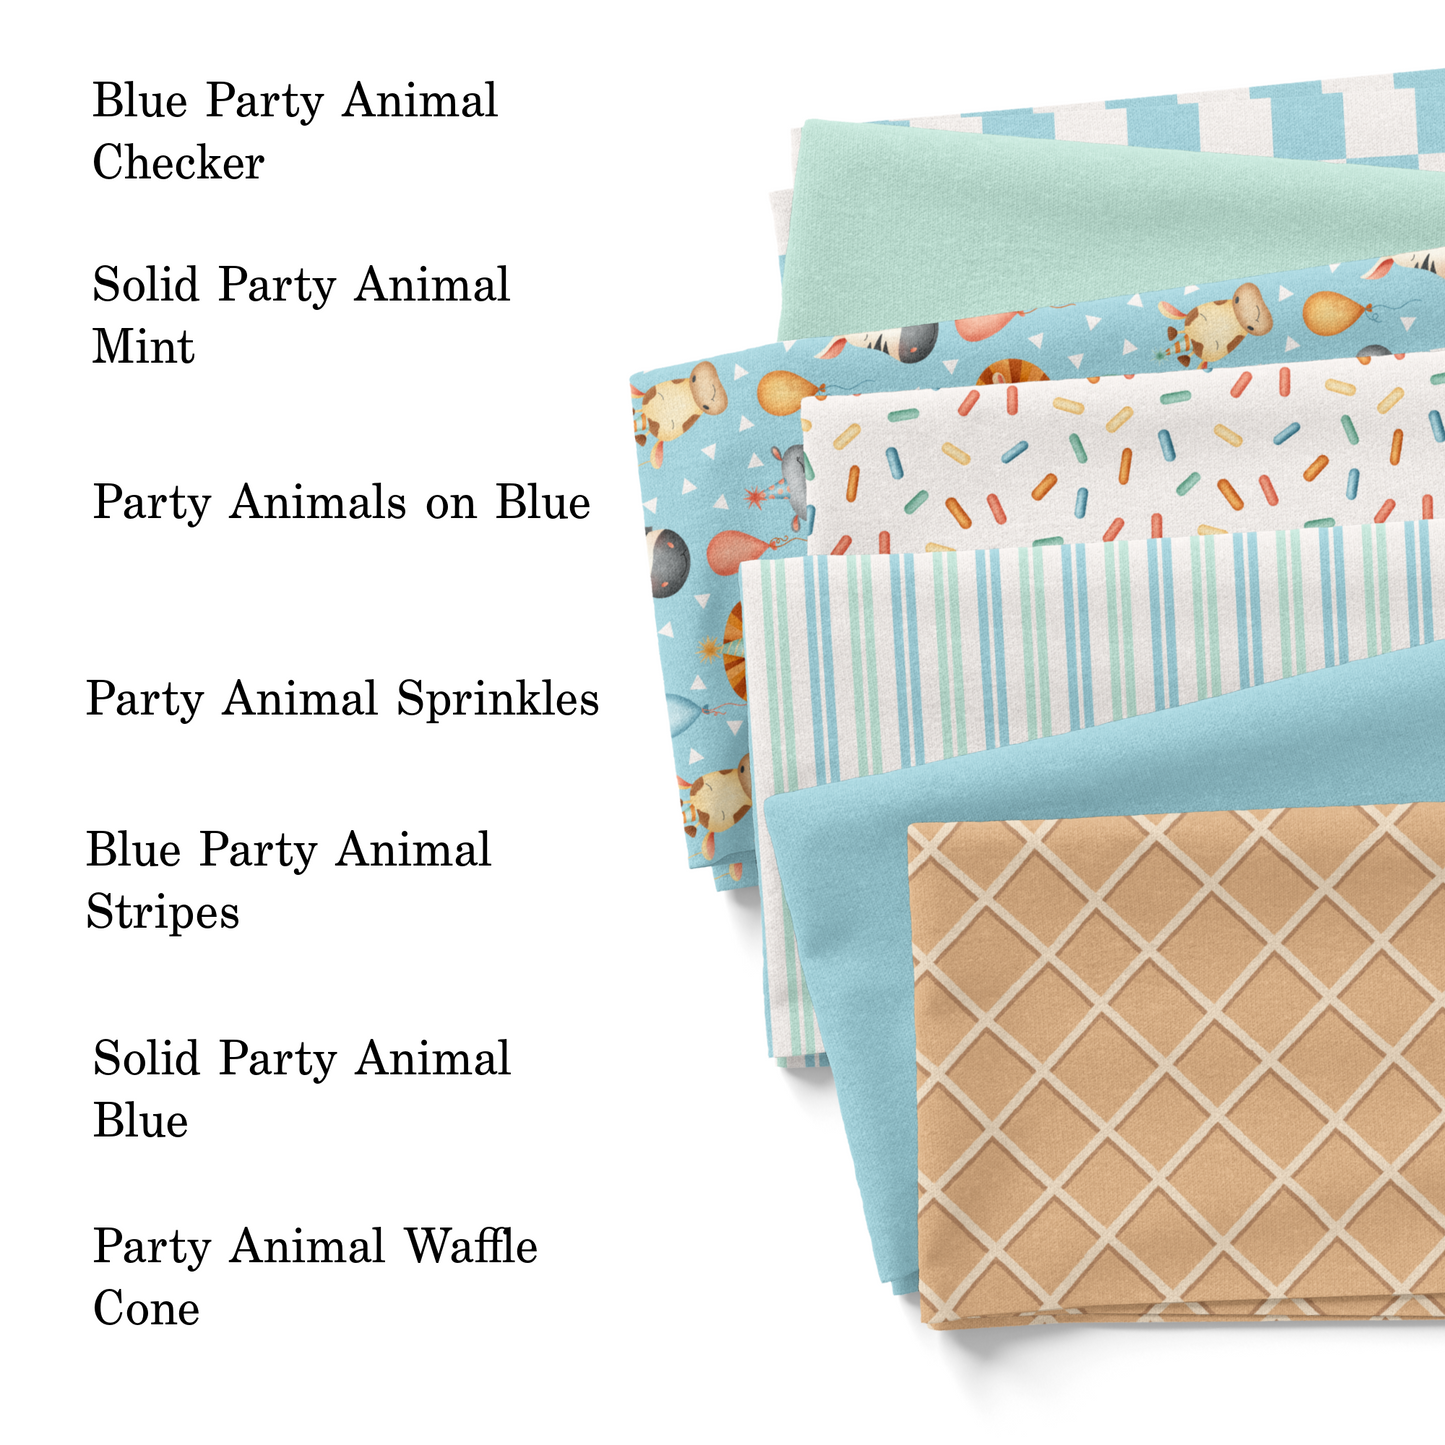 Party Animal Waffle Cone Fabric By The Yard